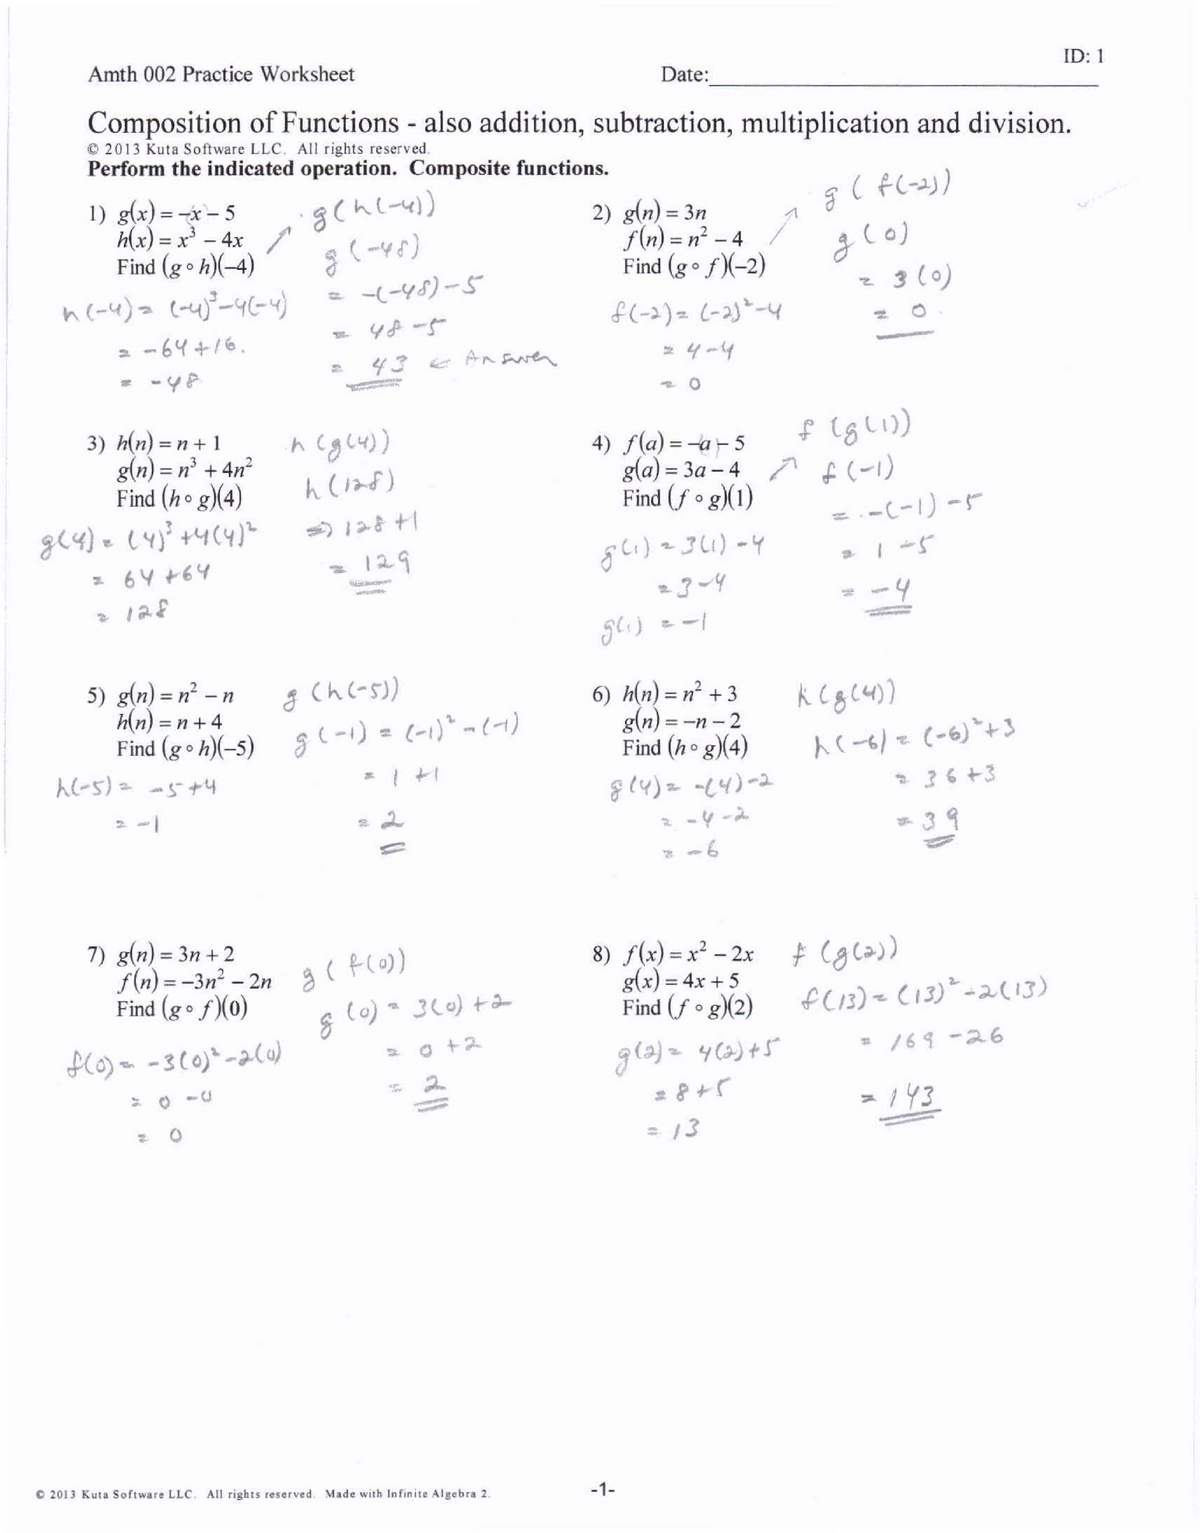 Composition of Functions Answers - AMTH 25 - Mathematics II - UR For Composition Of Functions Worksheet